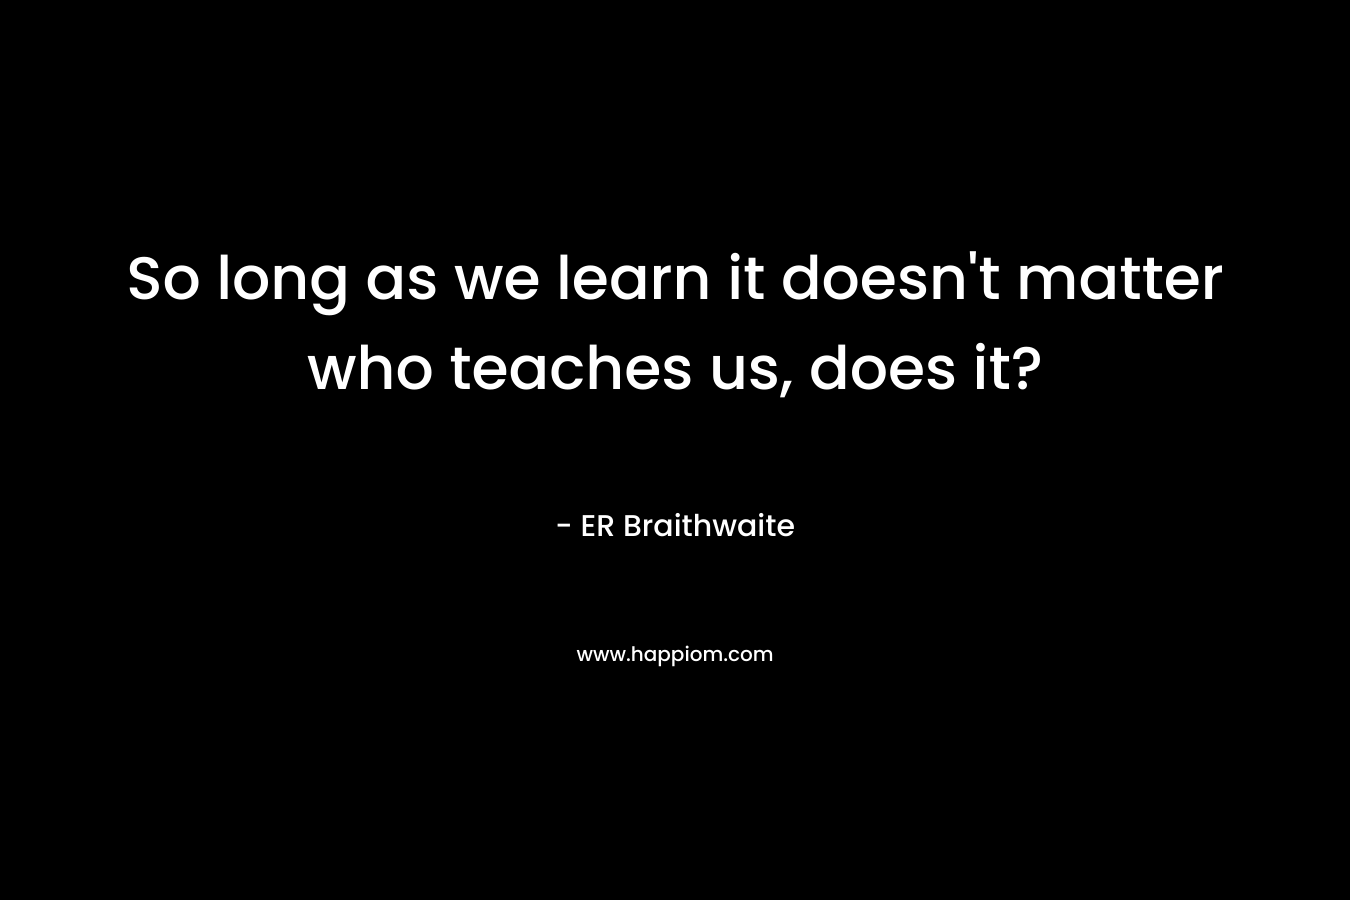 So long as we learn it doesn't matter who teaches us, does it?